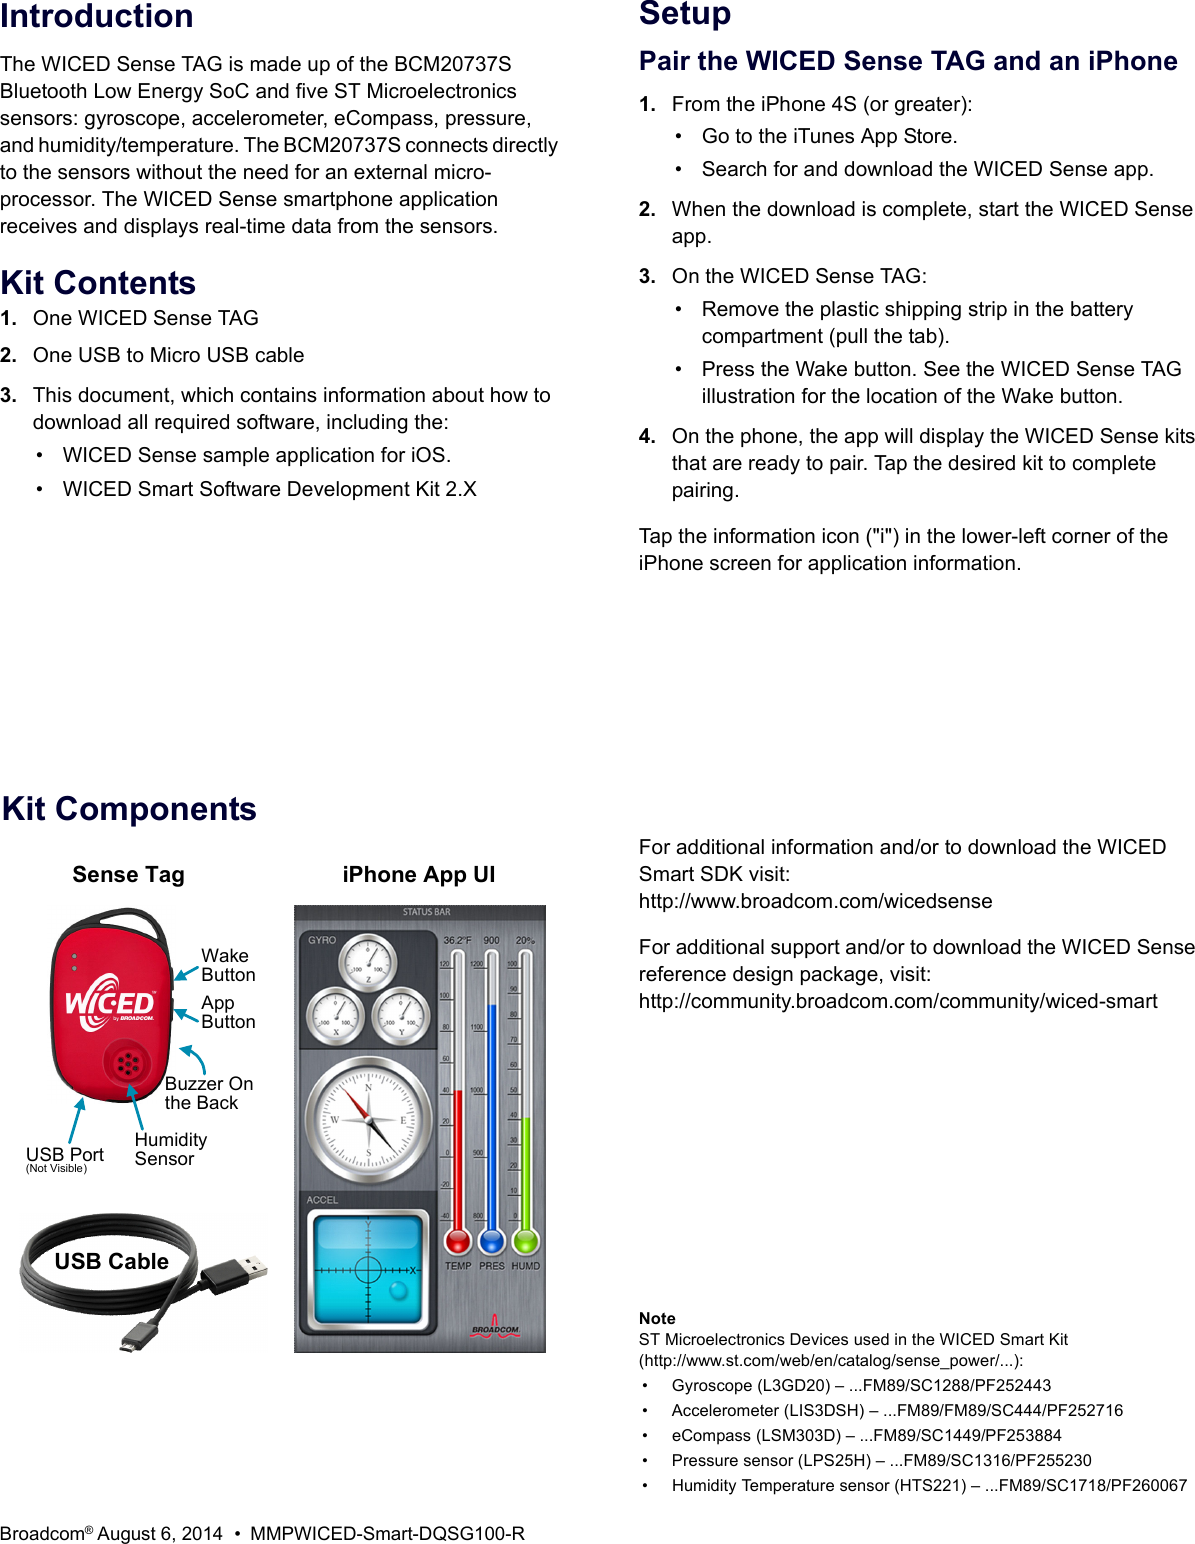 Broadcom® August 6, 2014 • MMPWICED-Smart-DQSG100-RIntroductionThe WICED Sense TAG is made up of the BCM20737S Bluetooth Low Energy SoC and five ST Microelectronics sensors: gyroscope, accelerometer, eCompass, pressure, and humidity/temperature. The BCM20737S connects directly to the sensors without the need for an external micro-processor. The WICED Sense smartphone application receives and displays real-time data from the sensors. Kit Contents1. One WICED Sense TAG2. One USB to Micro USB cable3. This document, which contains information about how to download all required software, including the:• WICED Sense sample application for iOS.• WICED Smart Software Development Kit 2.XSetupPair the WICED Sense TAG and an iPhone1. From the iPhone 4S (or greater):• Go to the iTunes App Store.• Search for and download the WICED Sense app.2. When the download is complete, start the WICED Sense app.3. On the WICED Sense TAG:• Remove the plastic shipping strip in the battery compartment (pull the tab).• Press the Wake button. See the WICED Sense TAG illustration for the location of the Wake button.4. On the phone, the app will display the WICED Sense kits that are ready to pair. Tap the desired kit to complete pairing.Tap the information icon (&quot;i&quot;) in the lower-left corner of the iPhone screen for application information.Kit ComponentsHumiditySensorUSB Port(Not Visible)Wake ButtonAppButtonUSB CableSense Tag iPhone App UIBuzzer On the BackFor additional information and/or to download the WICED Smart SDK visit:http://www.broadcom.com/wicedsenseFor additional support and/or to download the WICED Sense reference design package, visit:http://community.broadcom.com/community/wiced-smartNoteST Microelectronics Devices used in the WICED Smart Kit(http://www.st.com/web/en/catalog/sense_power/...):• Gyroscope (L3GD20) – ...FM89/SC1288/PF252443 • Accelerometer (LIS3DSH) – ...FM89/FM89/SC444/PF252716 • eCompass (LSM303D) – ...FM89/SC1449/PF253884 • Pressure sensor (LPS25H) – ...FM89/SC1316/PF255230 • Humidity Temperature sensor (HTS221) – ...FM89/SC1718/PF260067